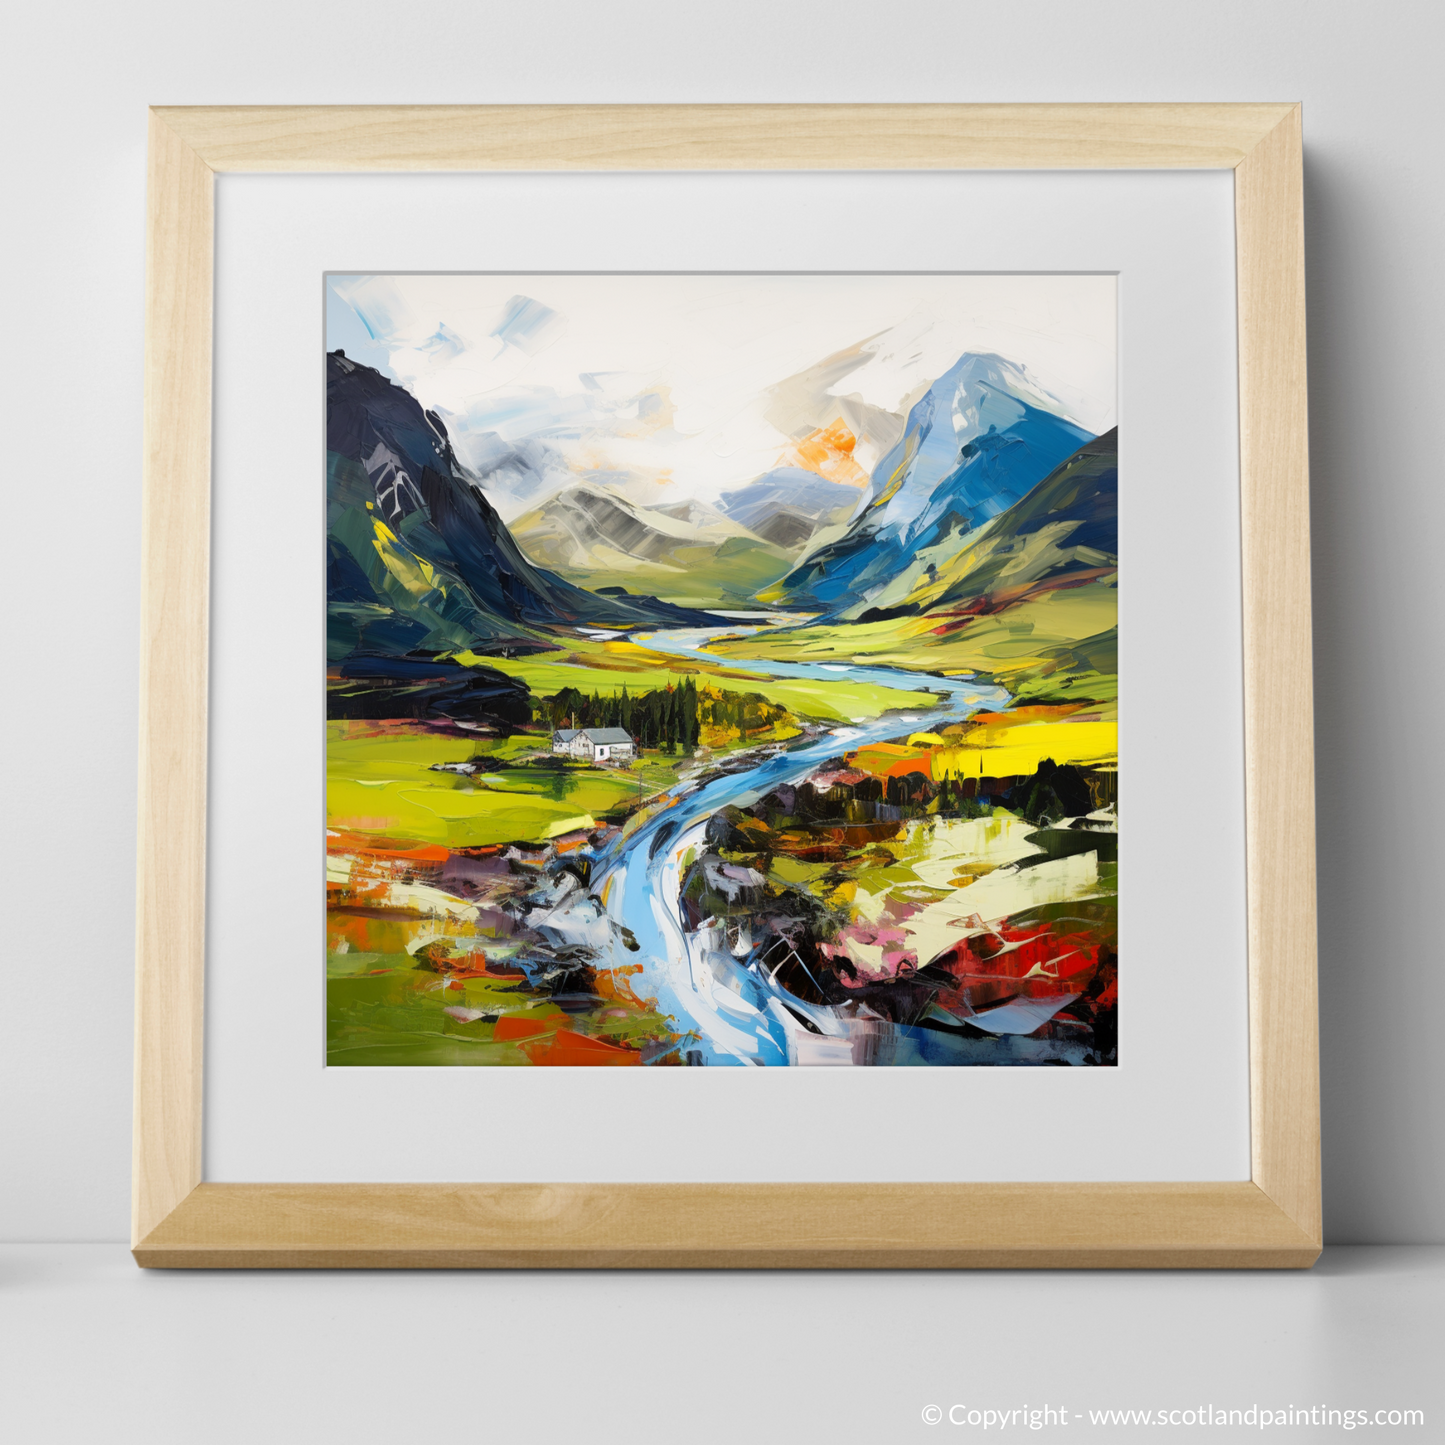 Art Print of Glencoe, Argyll and Bute with a natural frame